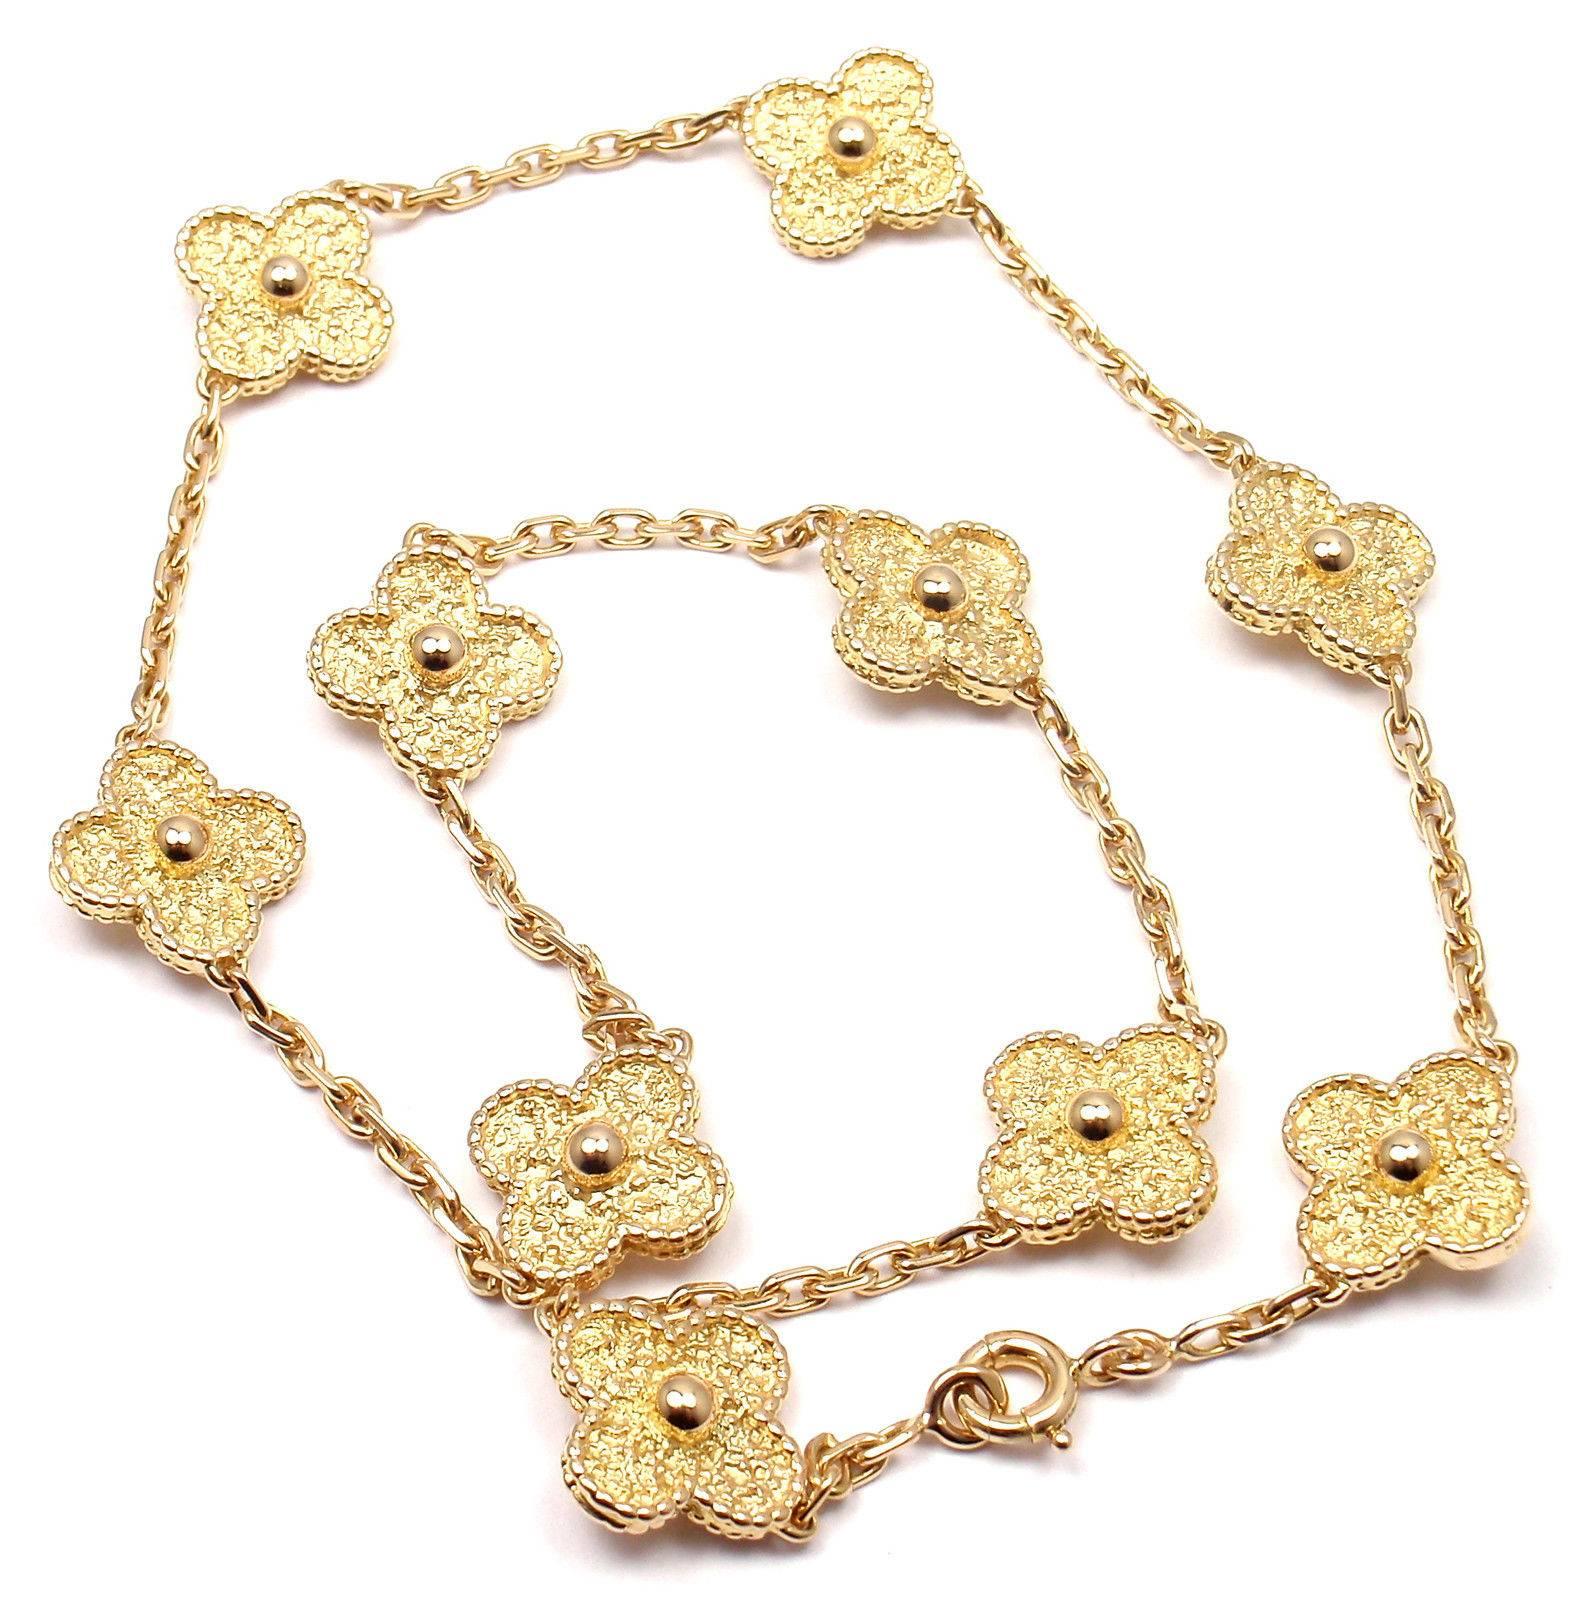 18k Yellow Gold Vintage Alhambra 10 Motif Necklace by Van Cleef & Arpels.
This necklace comes with Van Cleef & Arpels service paper from Van Cleef and Arpels store in Japan.

Details:
Length: 16